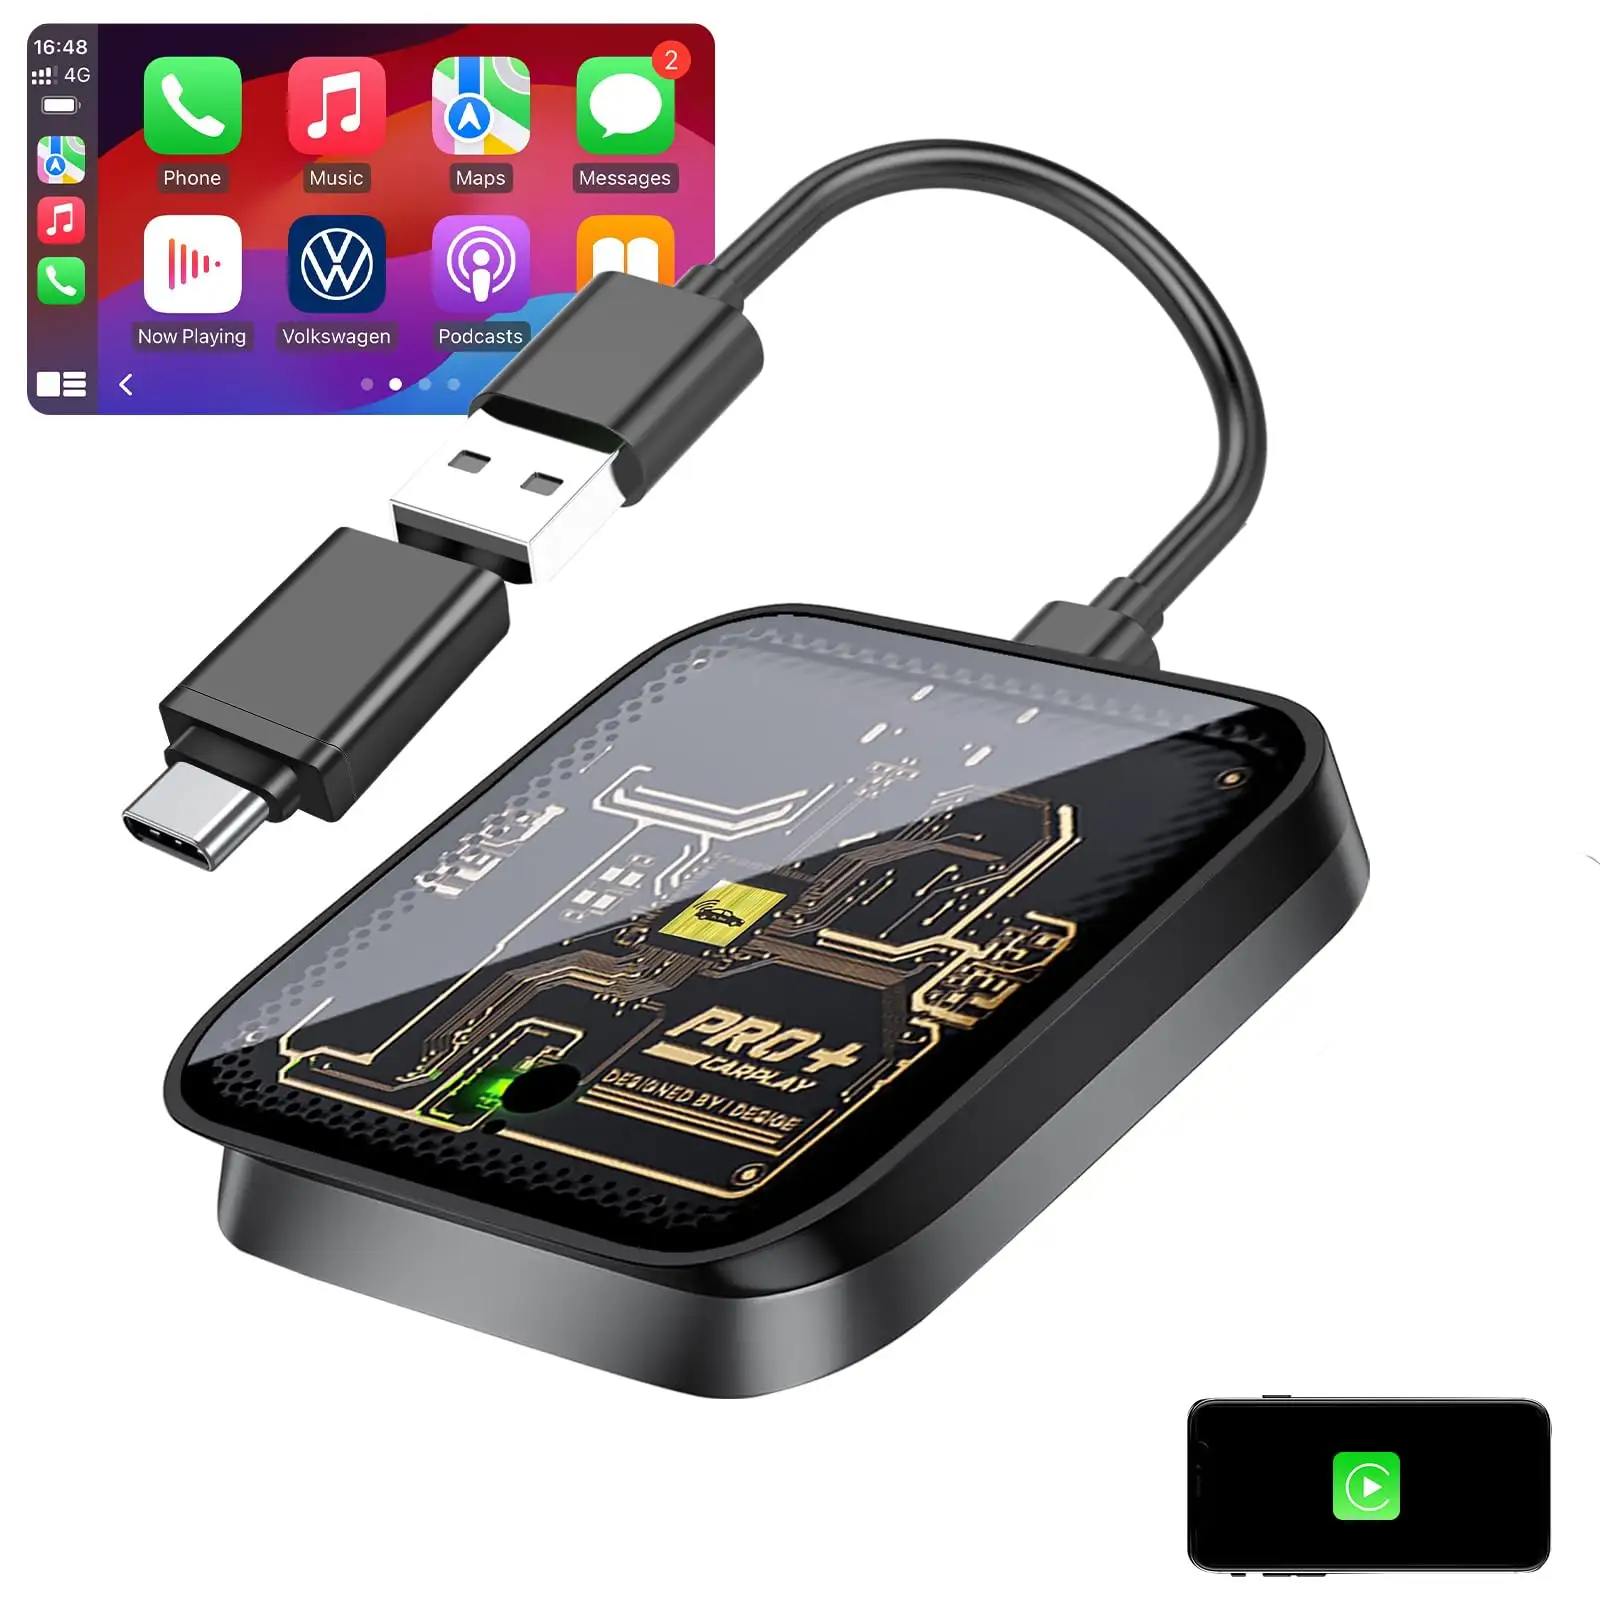 Phoebus Link Carplay devices Android Auto Dongle box for car Smart car play Carplay wireless adapter